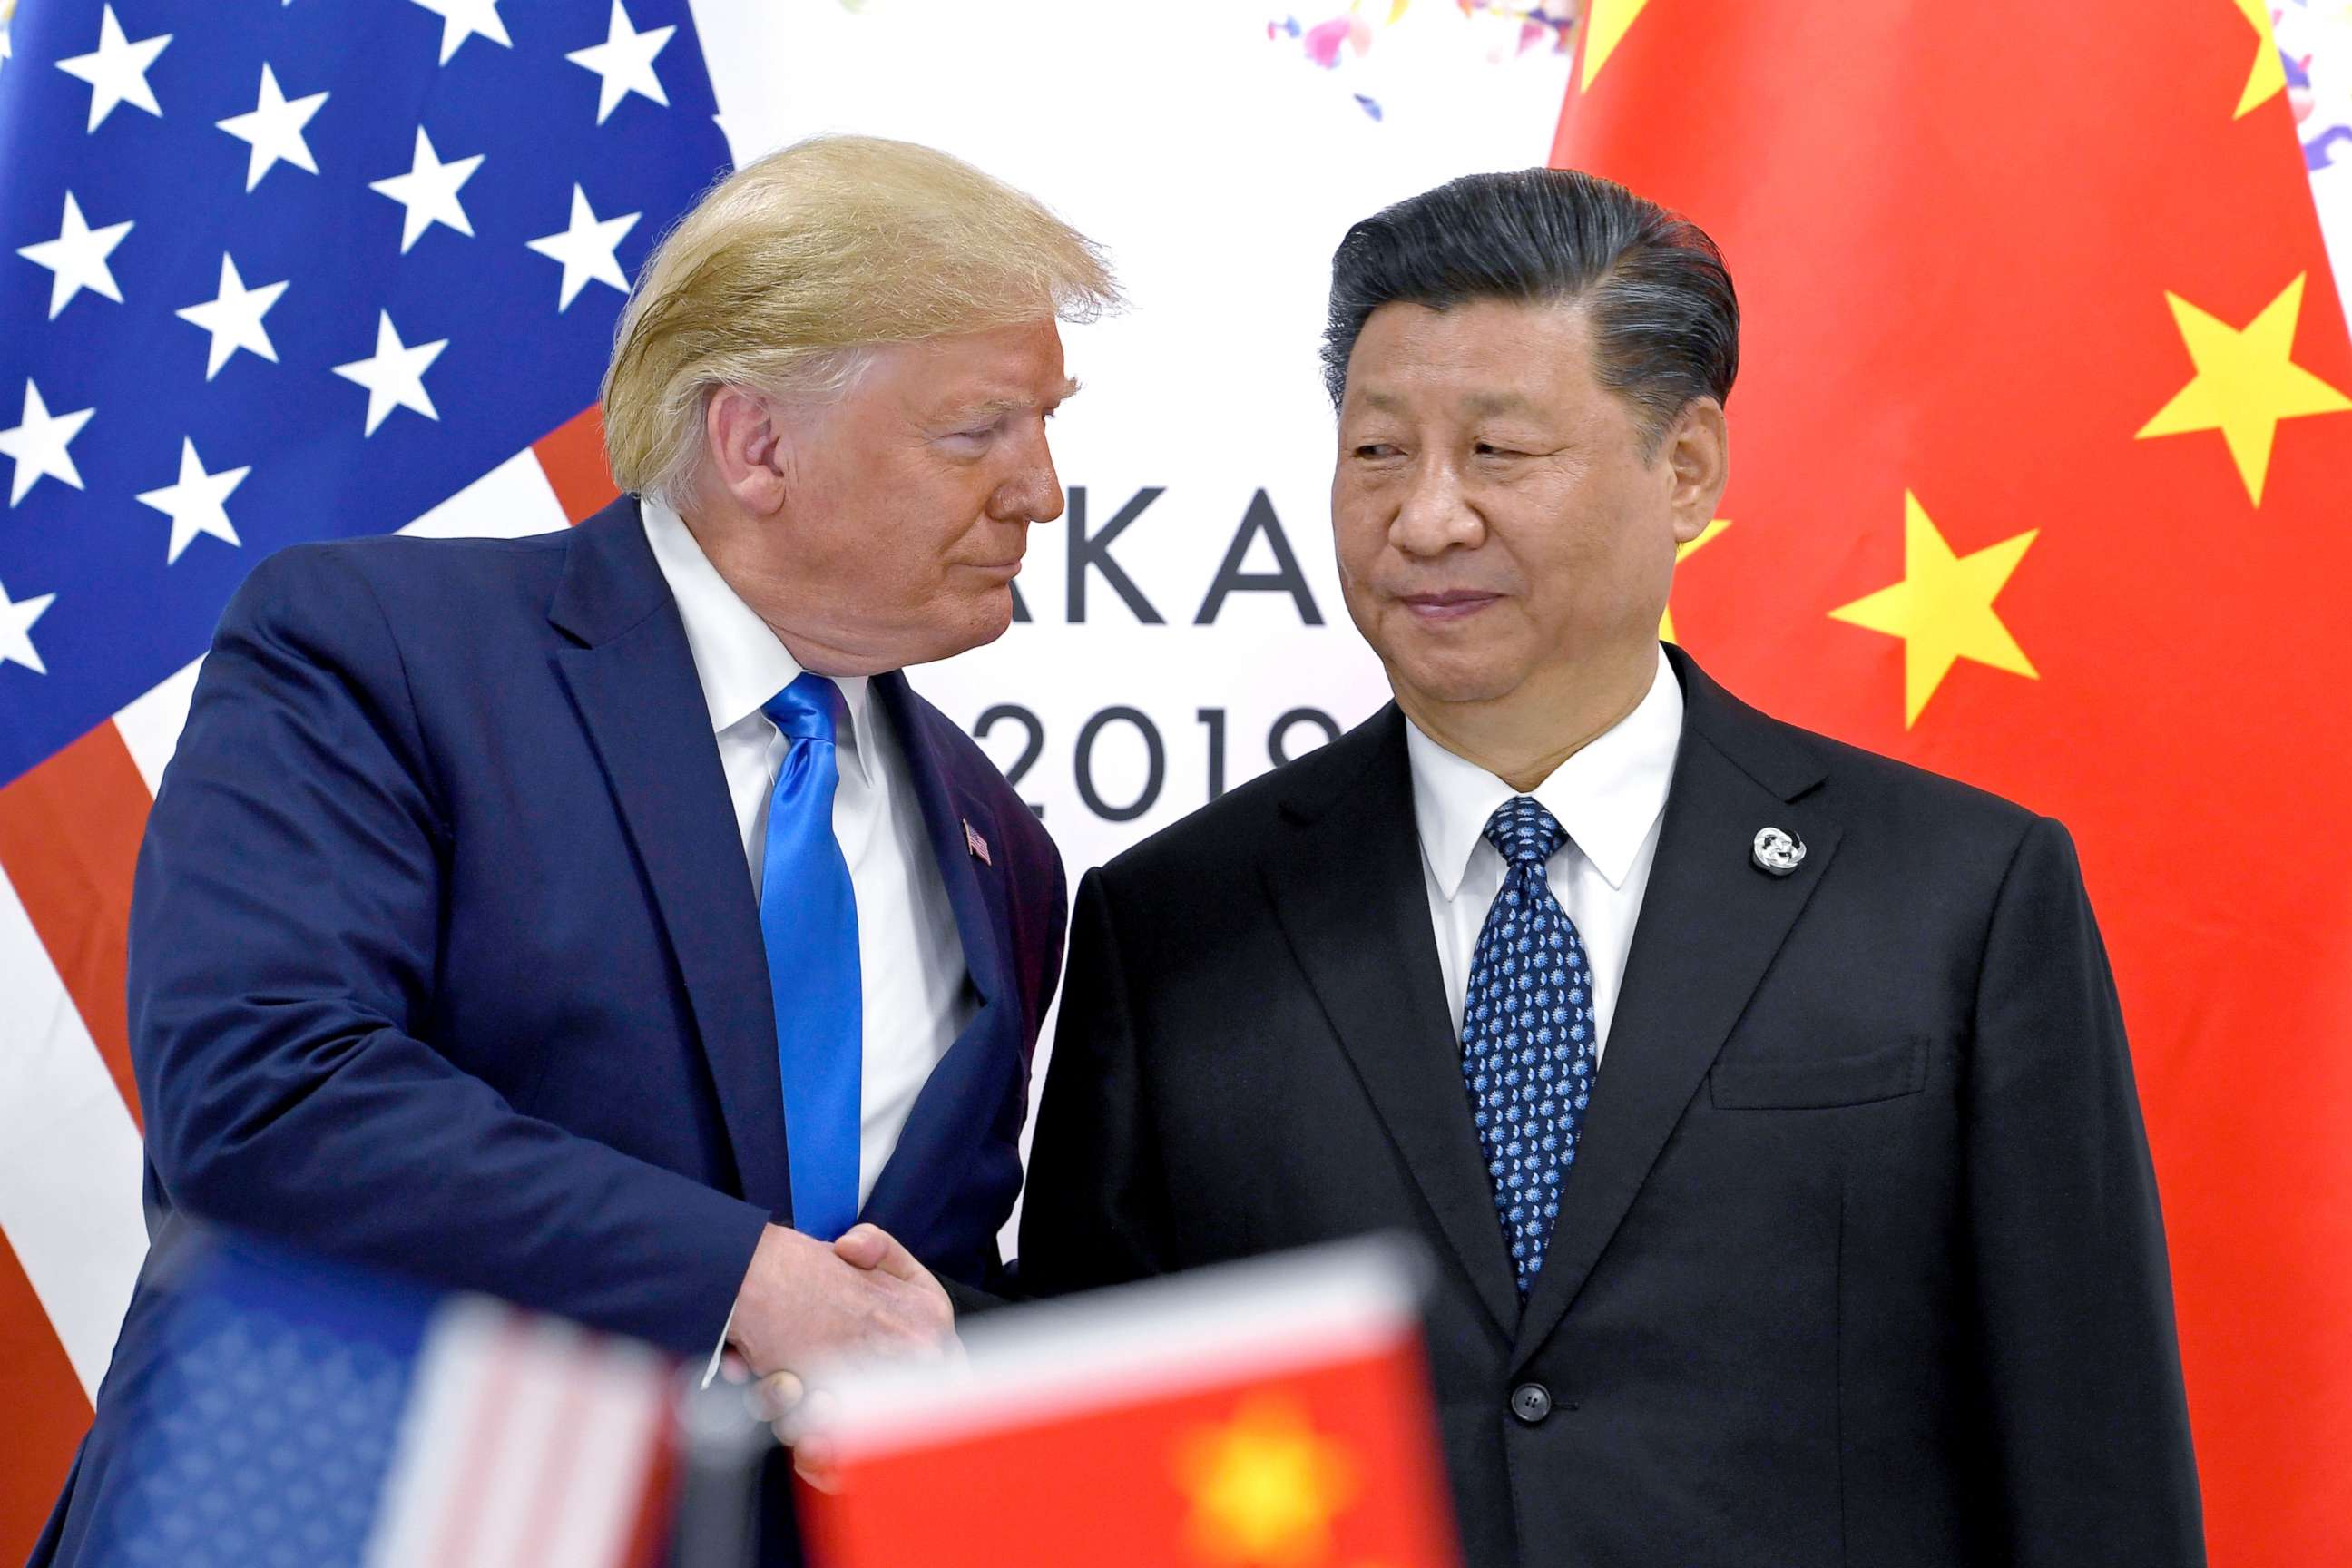 PHOTO: FILE - In this June 29, 2019, file photo, U.S. President Donald Trump, left, shakes hands with Chinese President Xi Jinping during a meeting on the sidelines of the G-20 summit in Osaka, western Japan.